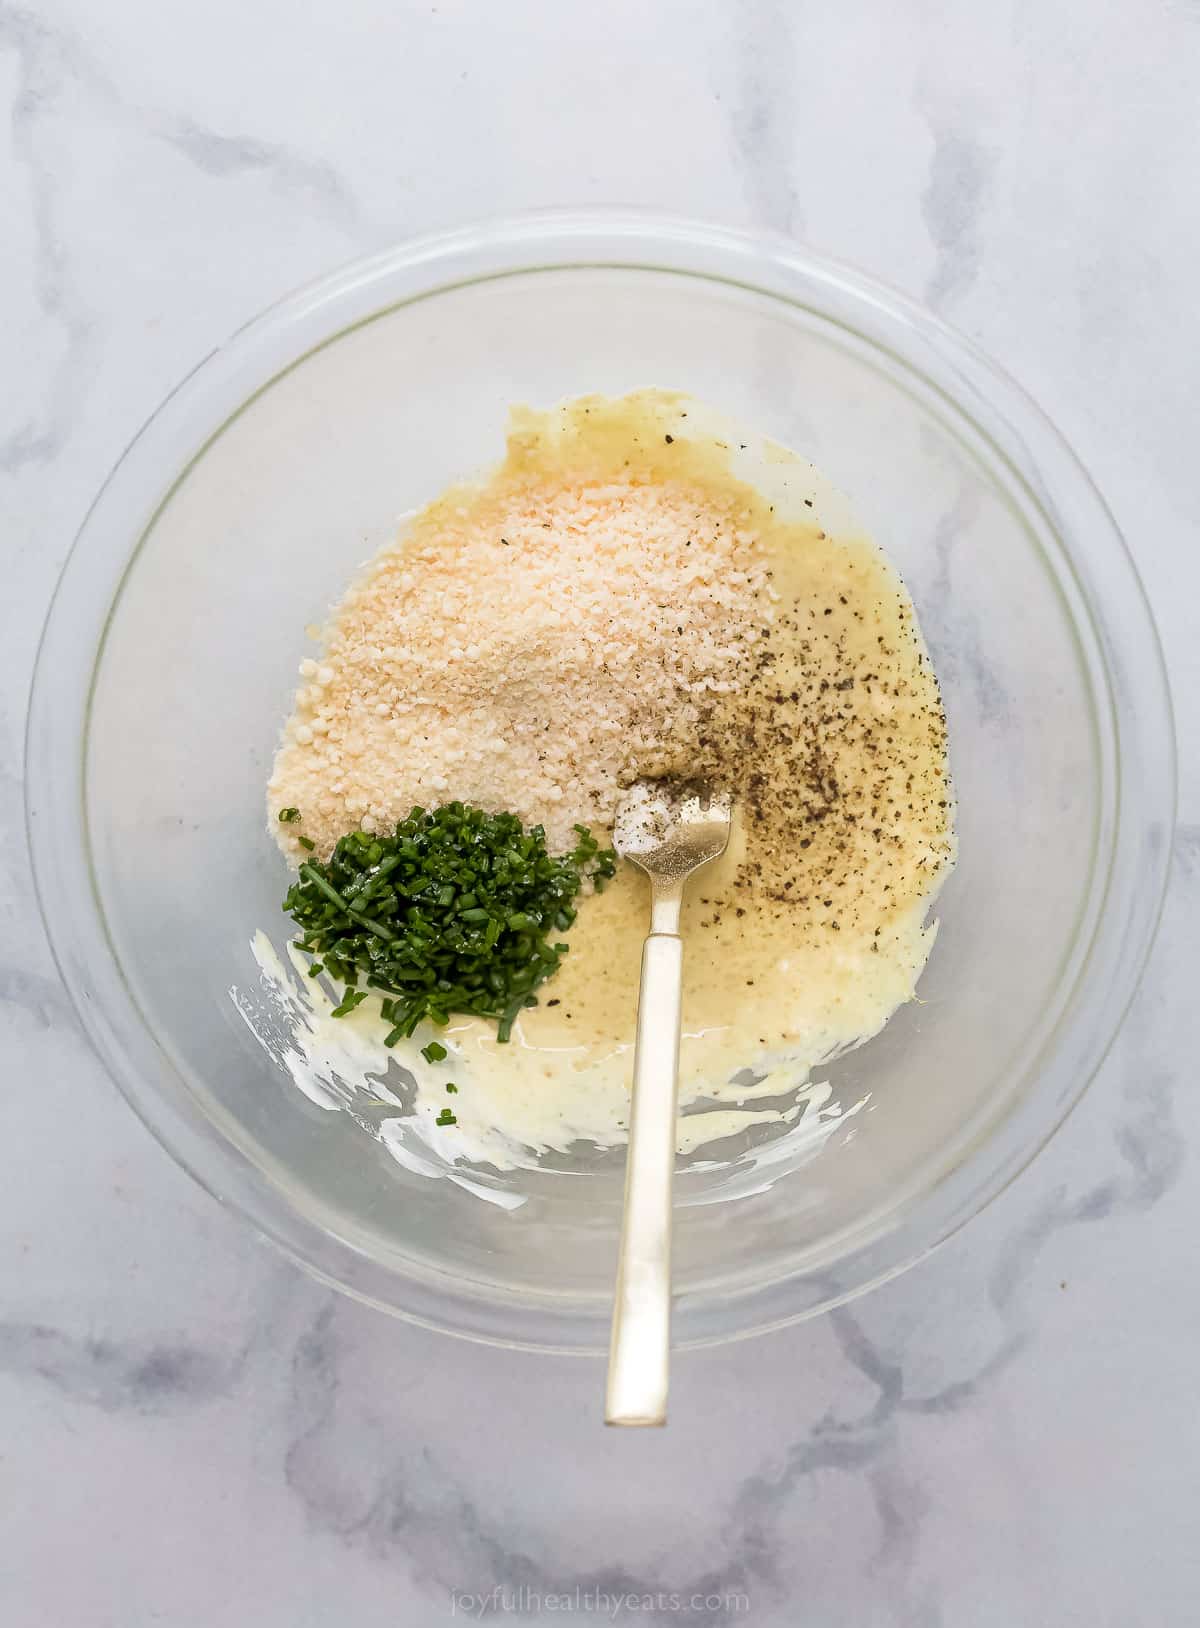 a bowl with bread crumbs, herbs, and parmesan cheese being mixed into a yogurt mixture